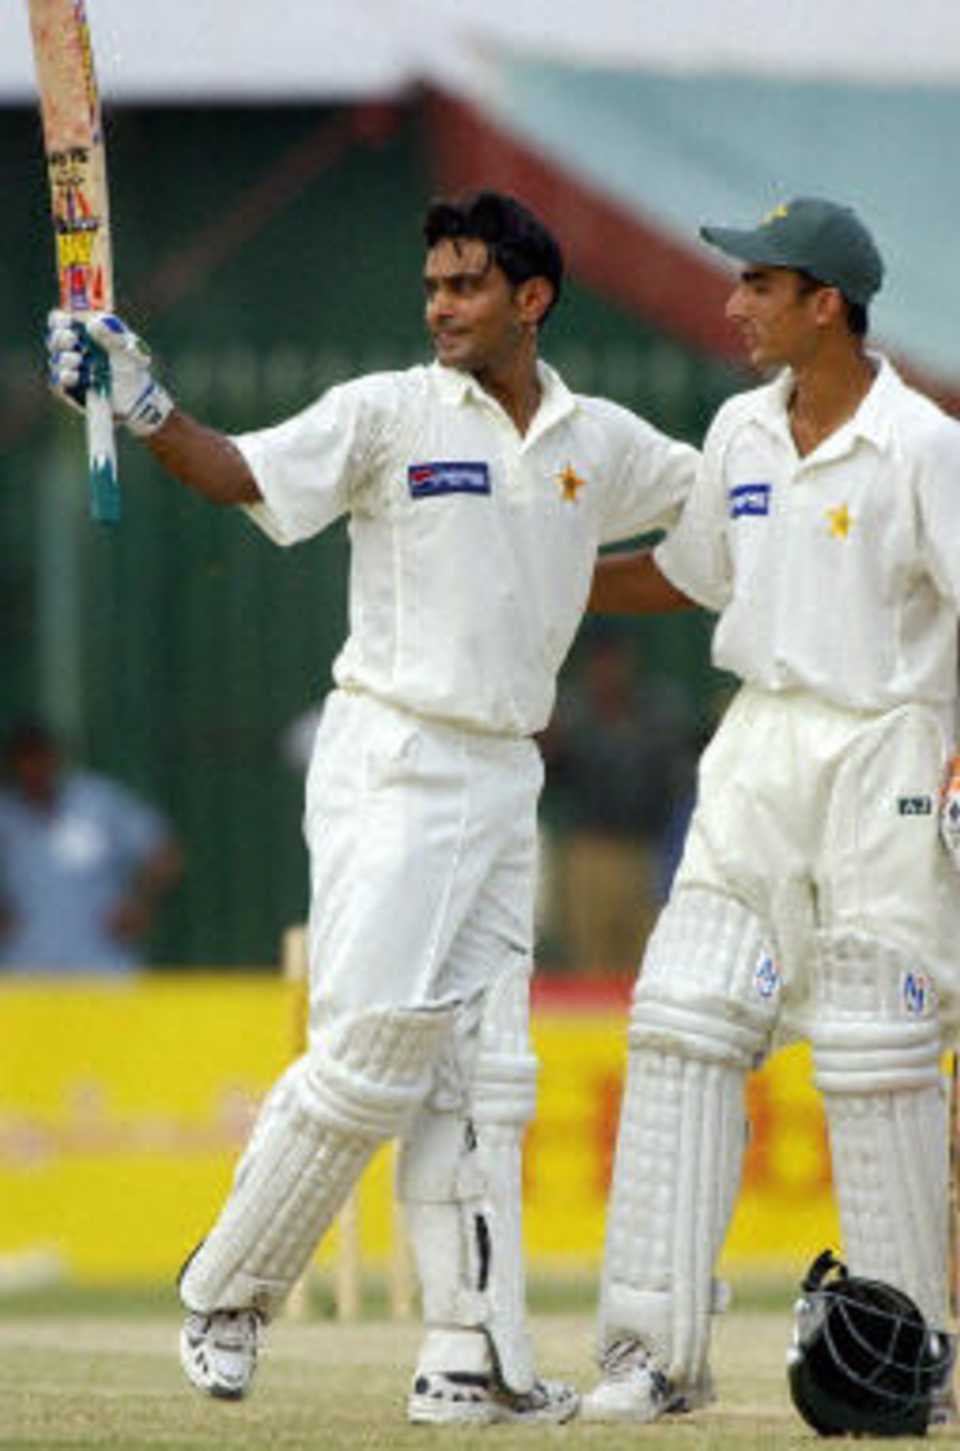 Mohammad Hafeez (L) acknowledges the crowd after his first Test century while teammate Yasir Hameed looks on during the fourth day of the second Test between Pakistan and Bangladesh in Peshawar, 30 August 2003.